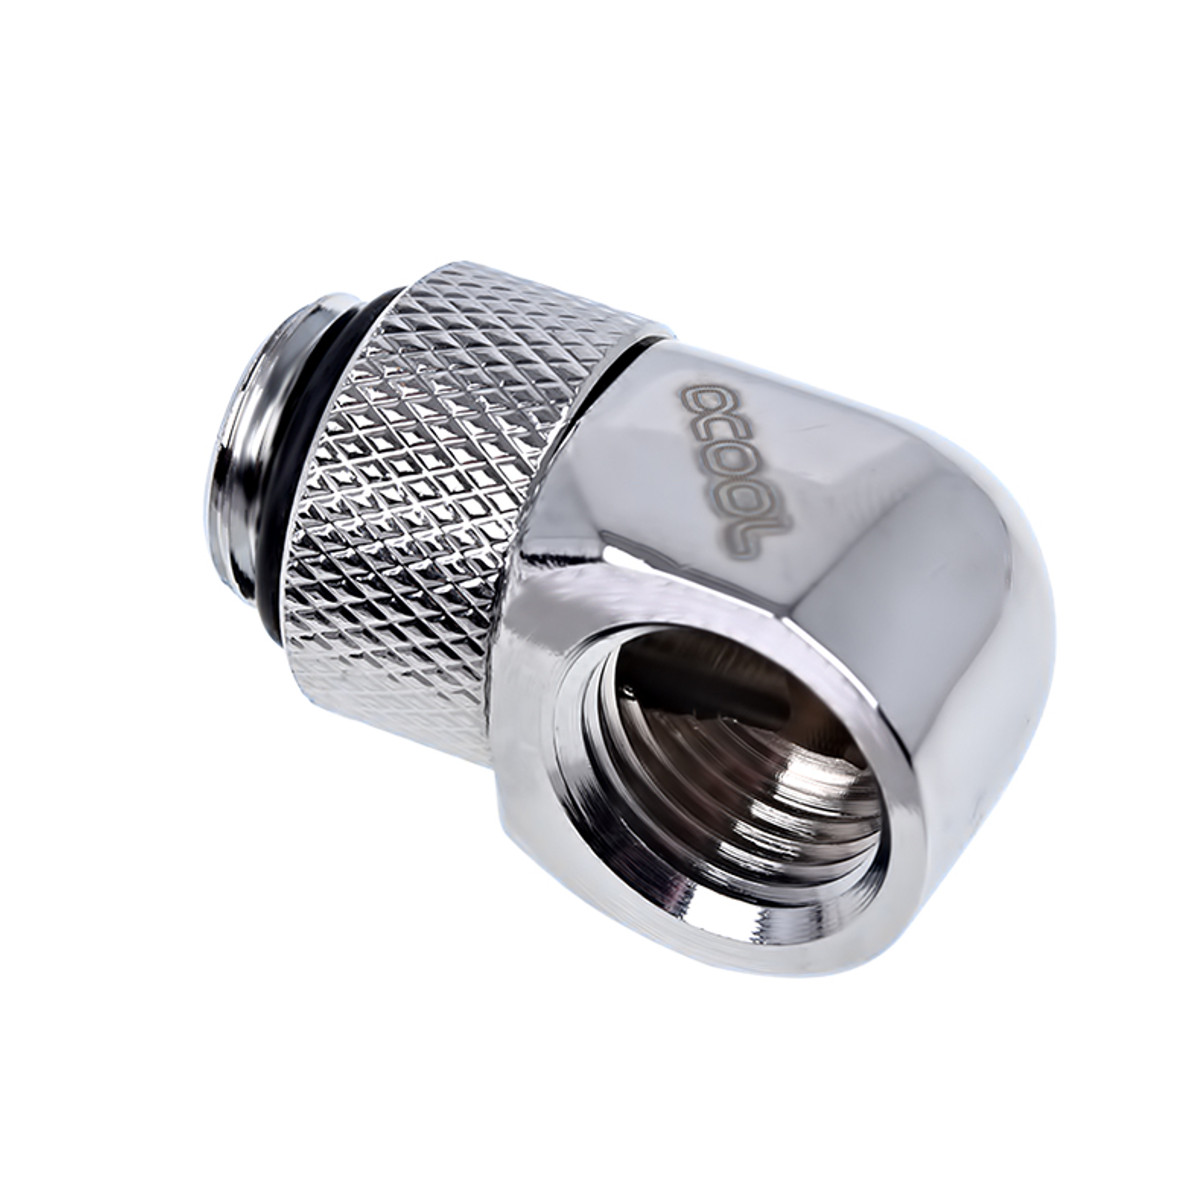 Alphacool Eiszapfen 90 Degree Angled Rotary Fitting -  Chrome